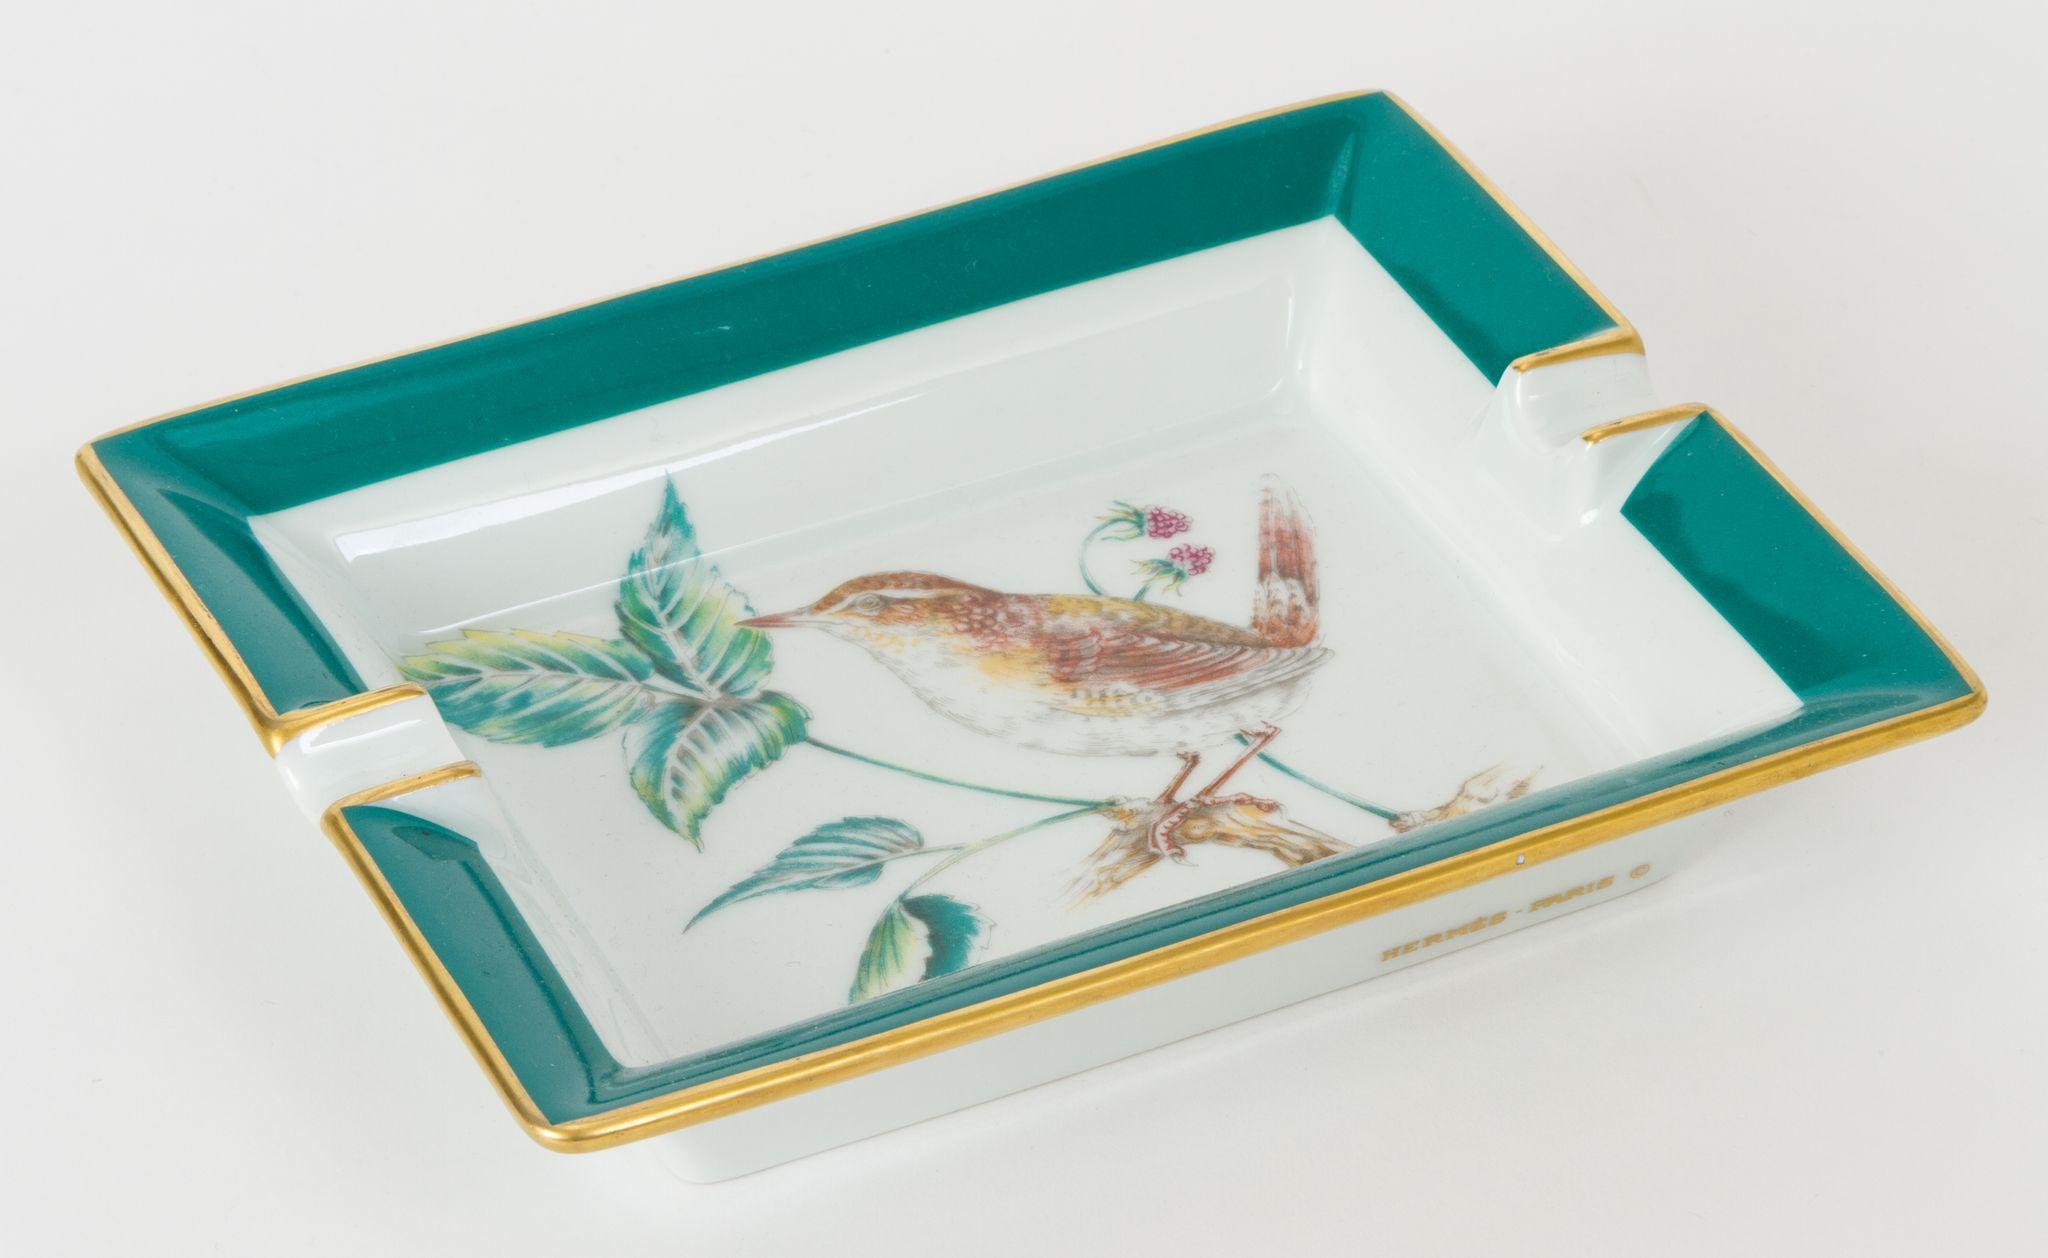 Hermès green and white porcelain ashtray with bird design. Excellent condition. 